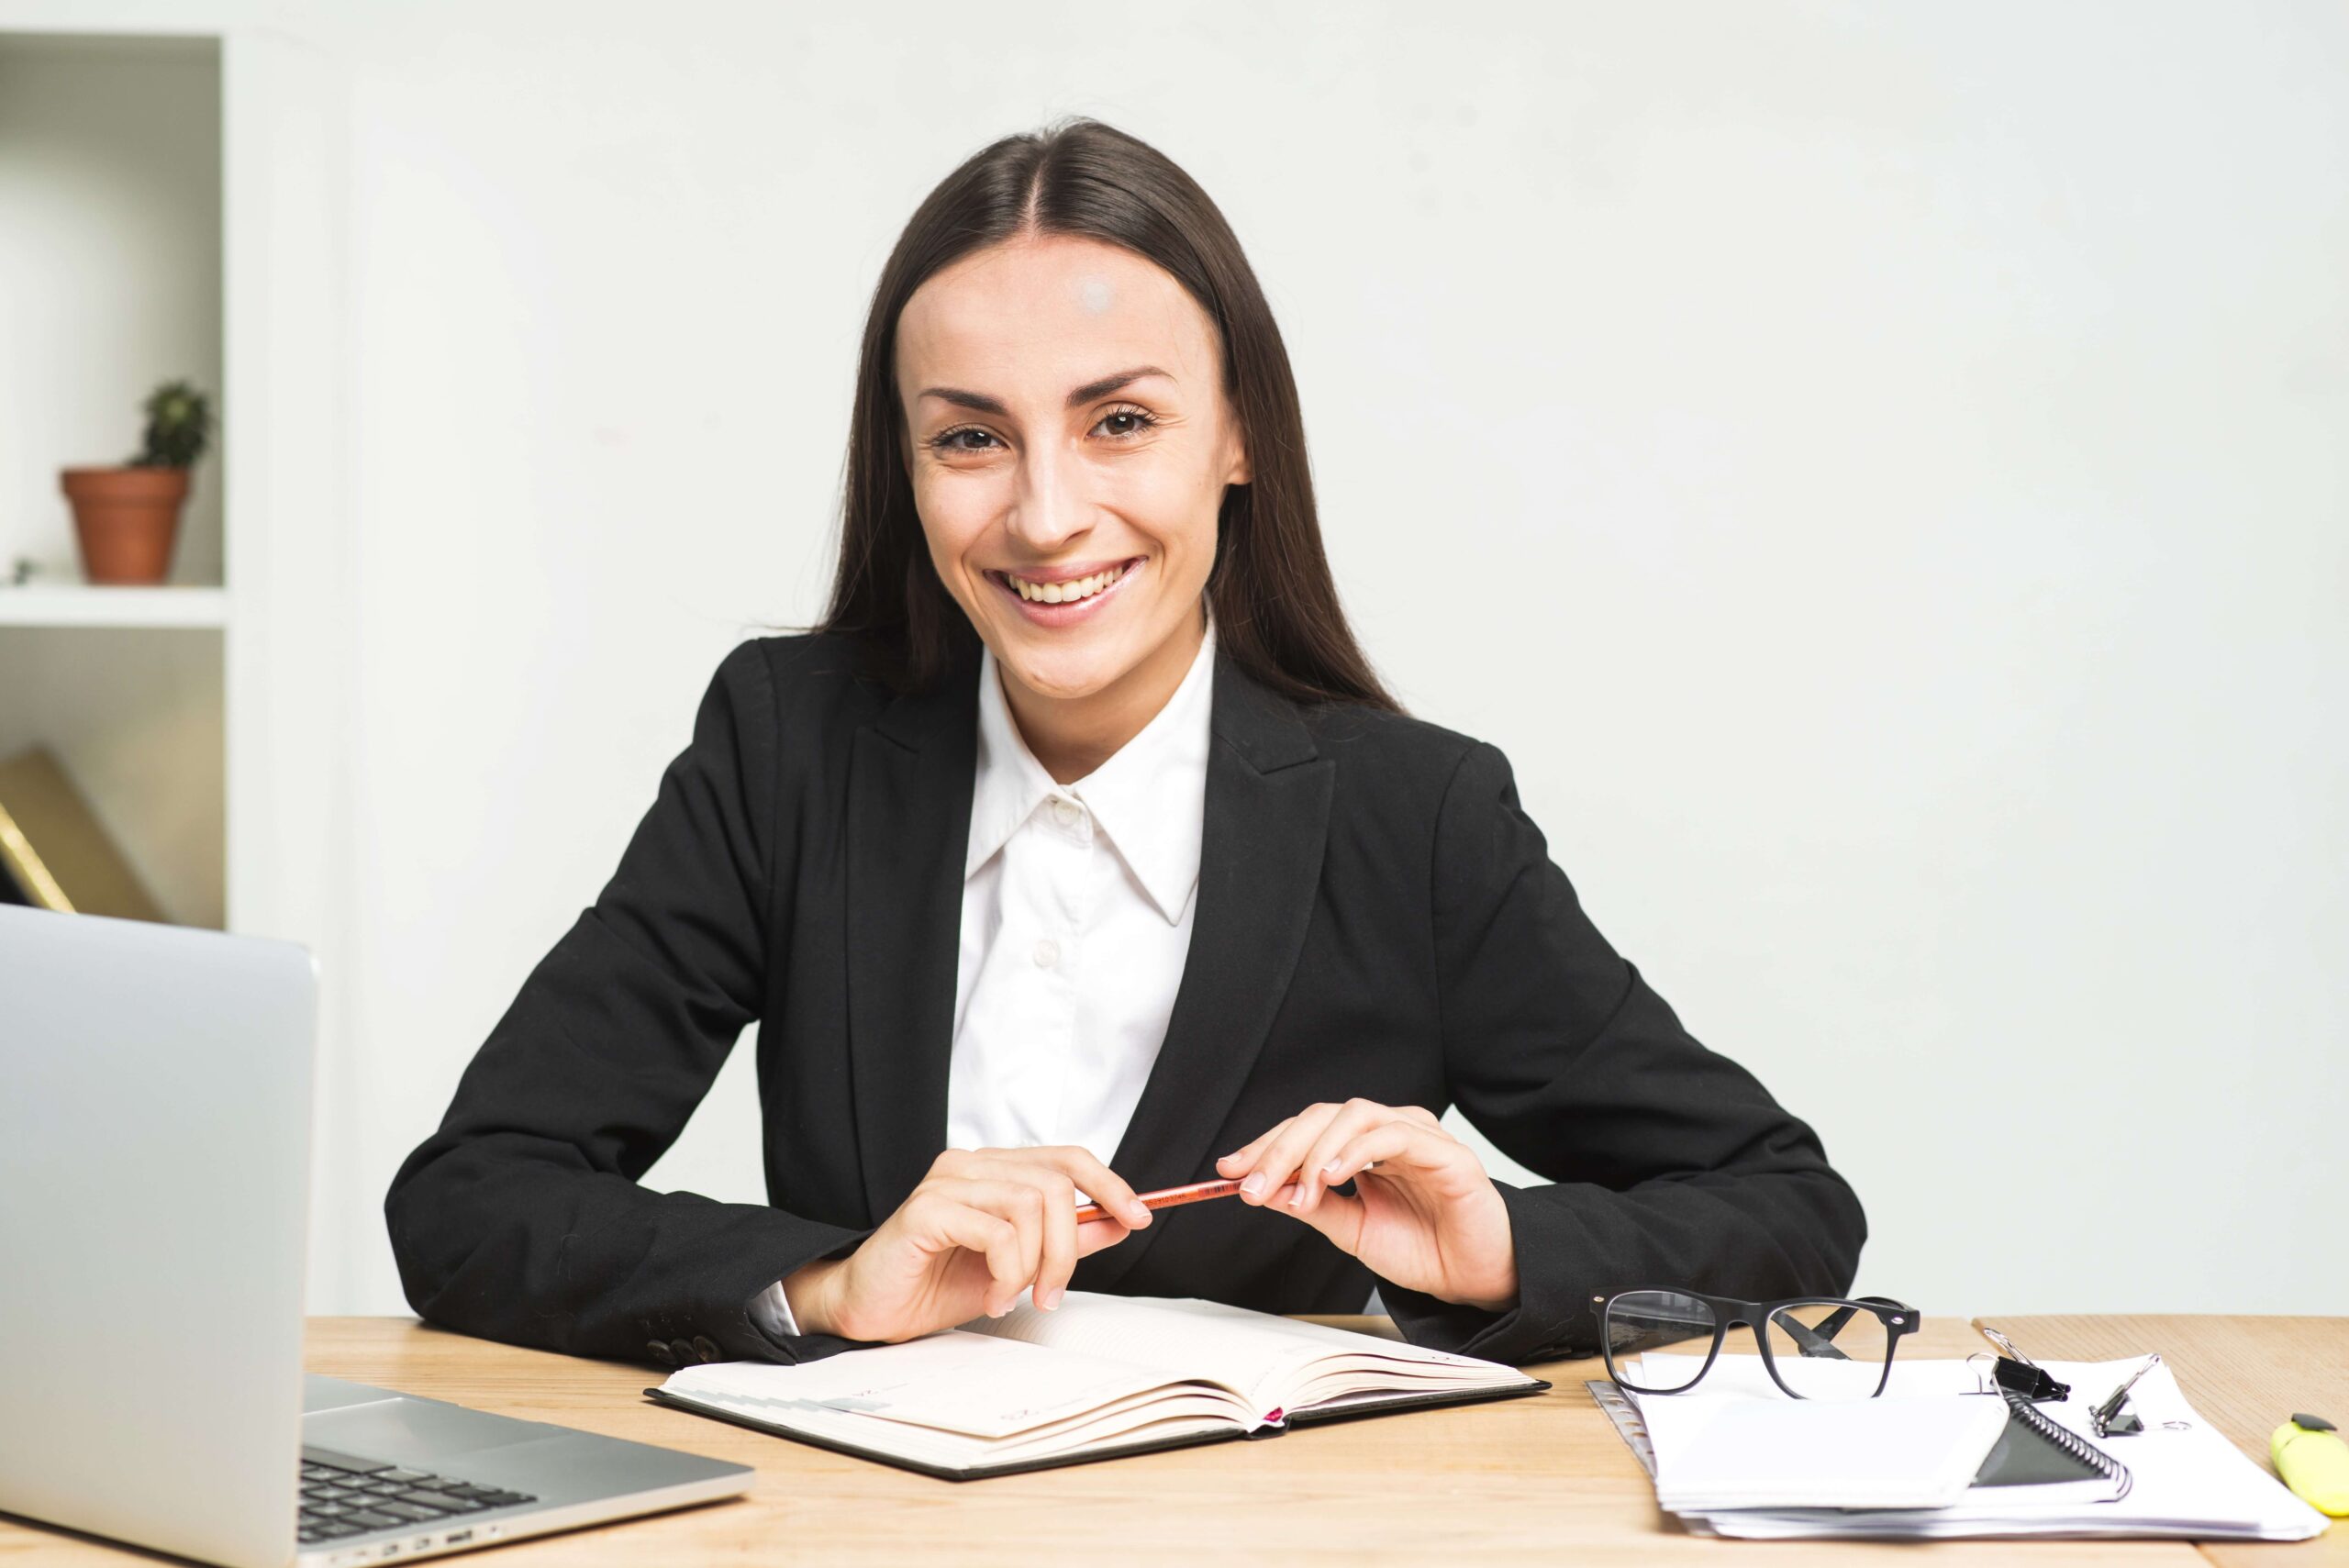 How to Become an Executive Assistant: Supporting Top-Level Management